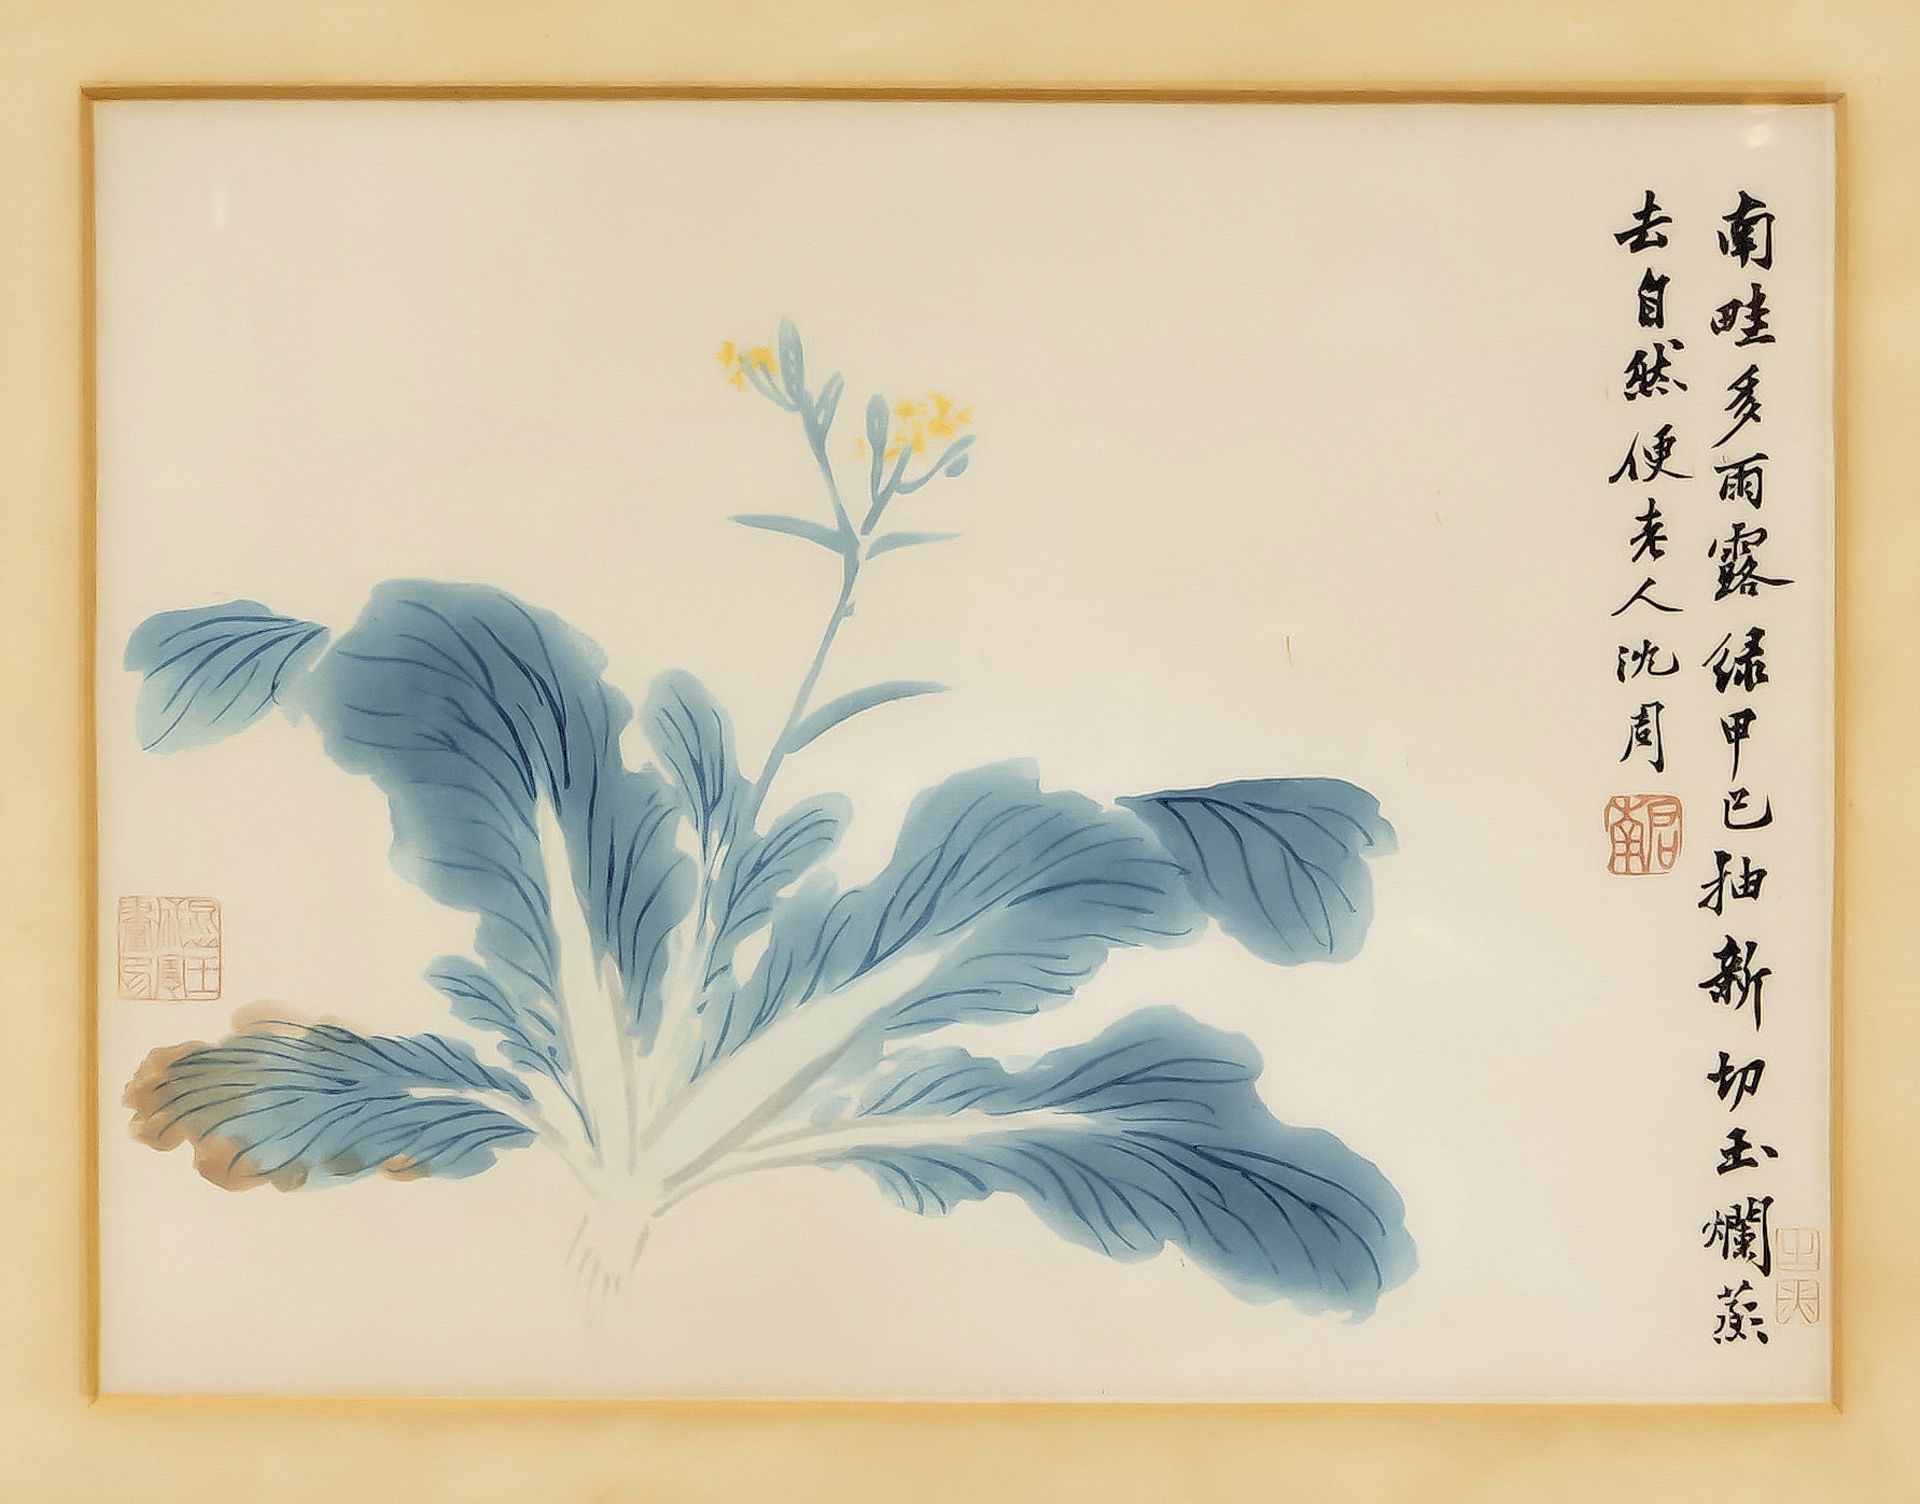 Pair of prints, China, mid-20th c. Depictions of individual plants, calligraphy. Framed behind glass